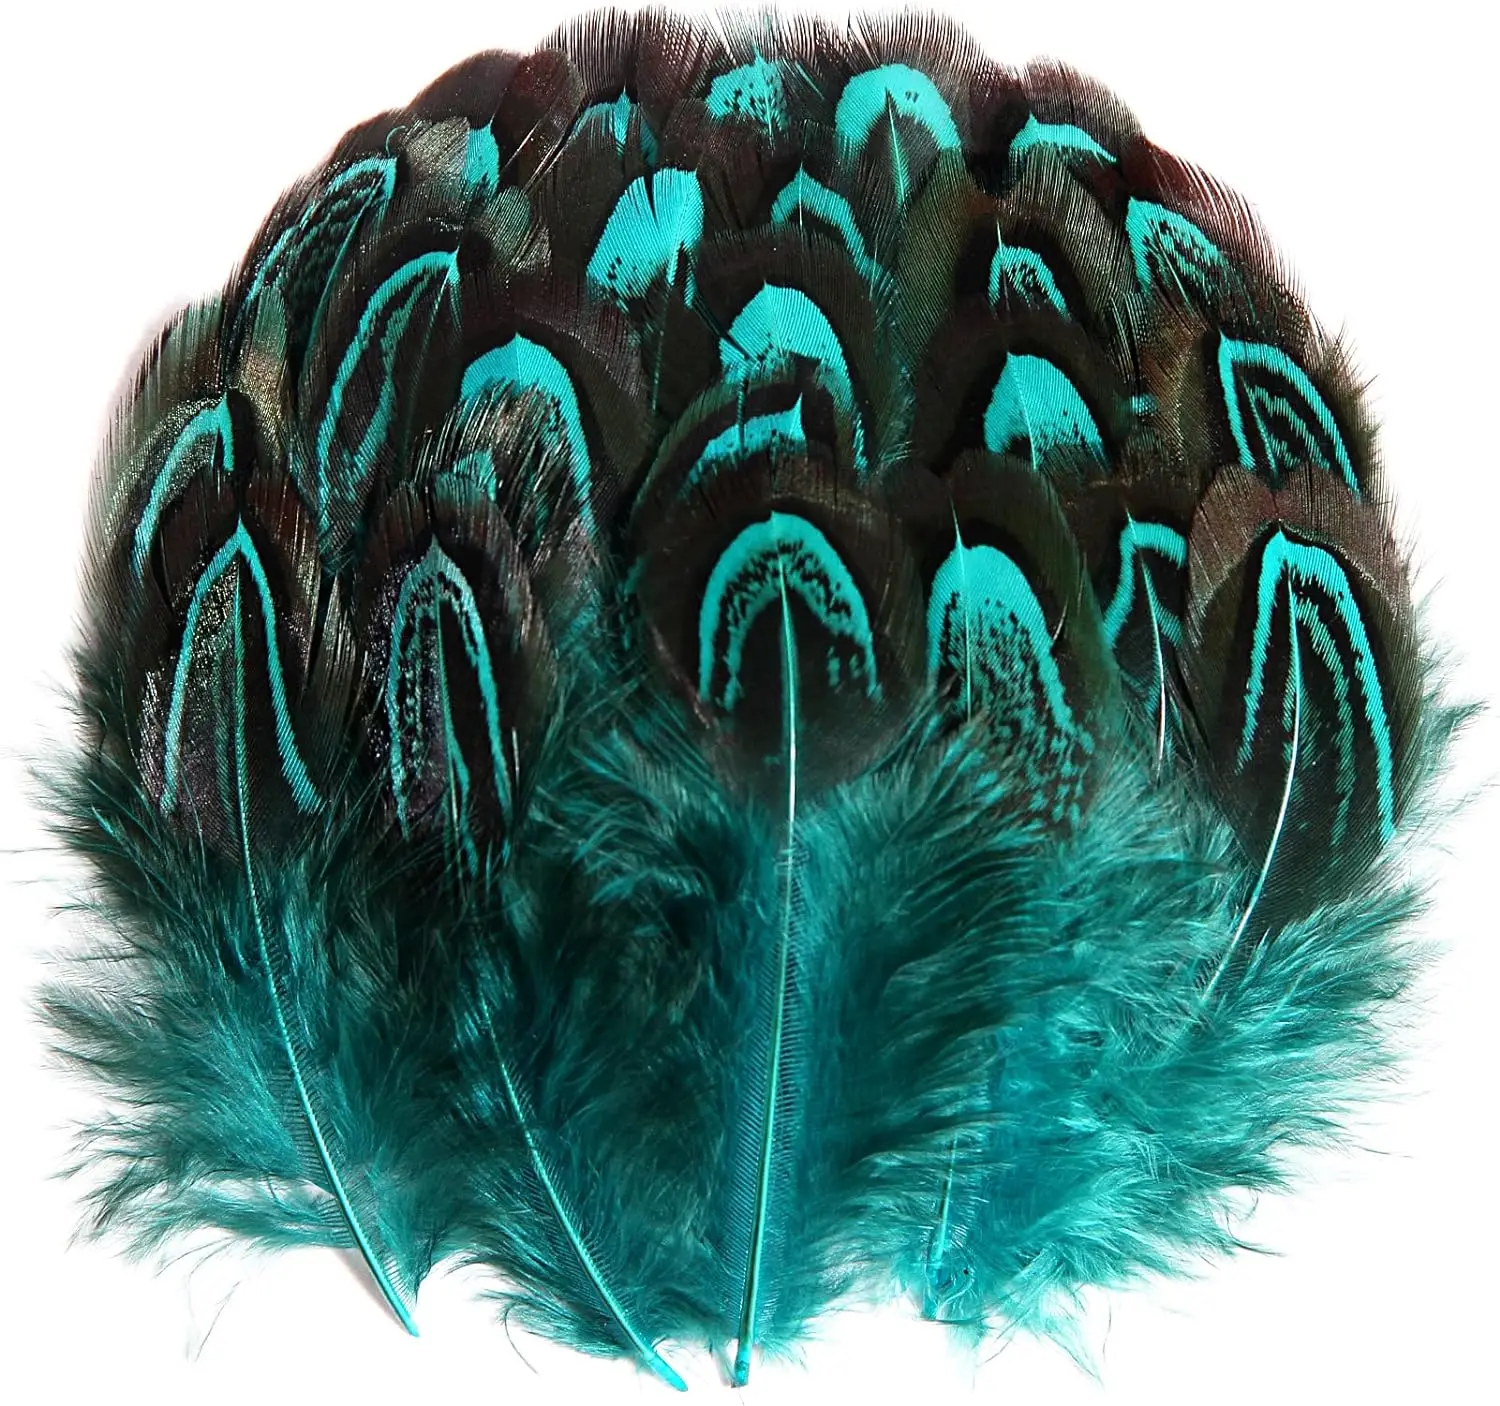 

Lake Blue Pheasant Feathers 100pcs 2-3 Inch Thanksgiving Crafts Hats Sewing Clothing Wedding Dream Catcher Decoration Feather